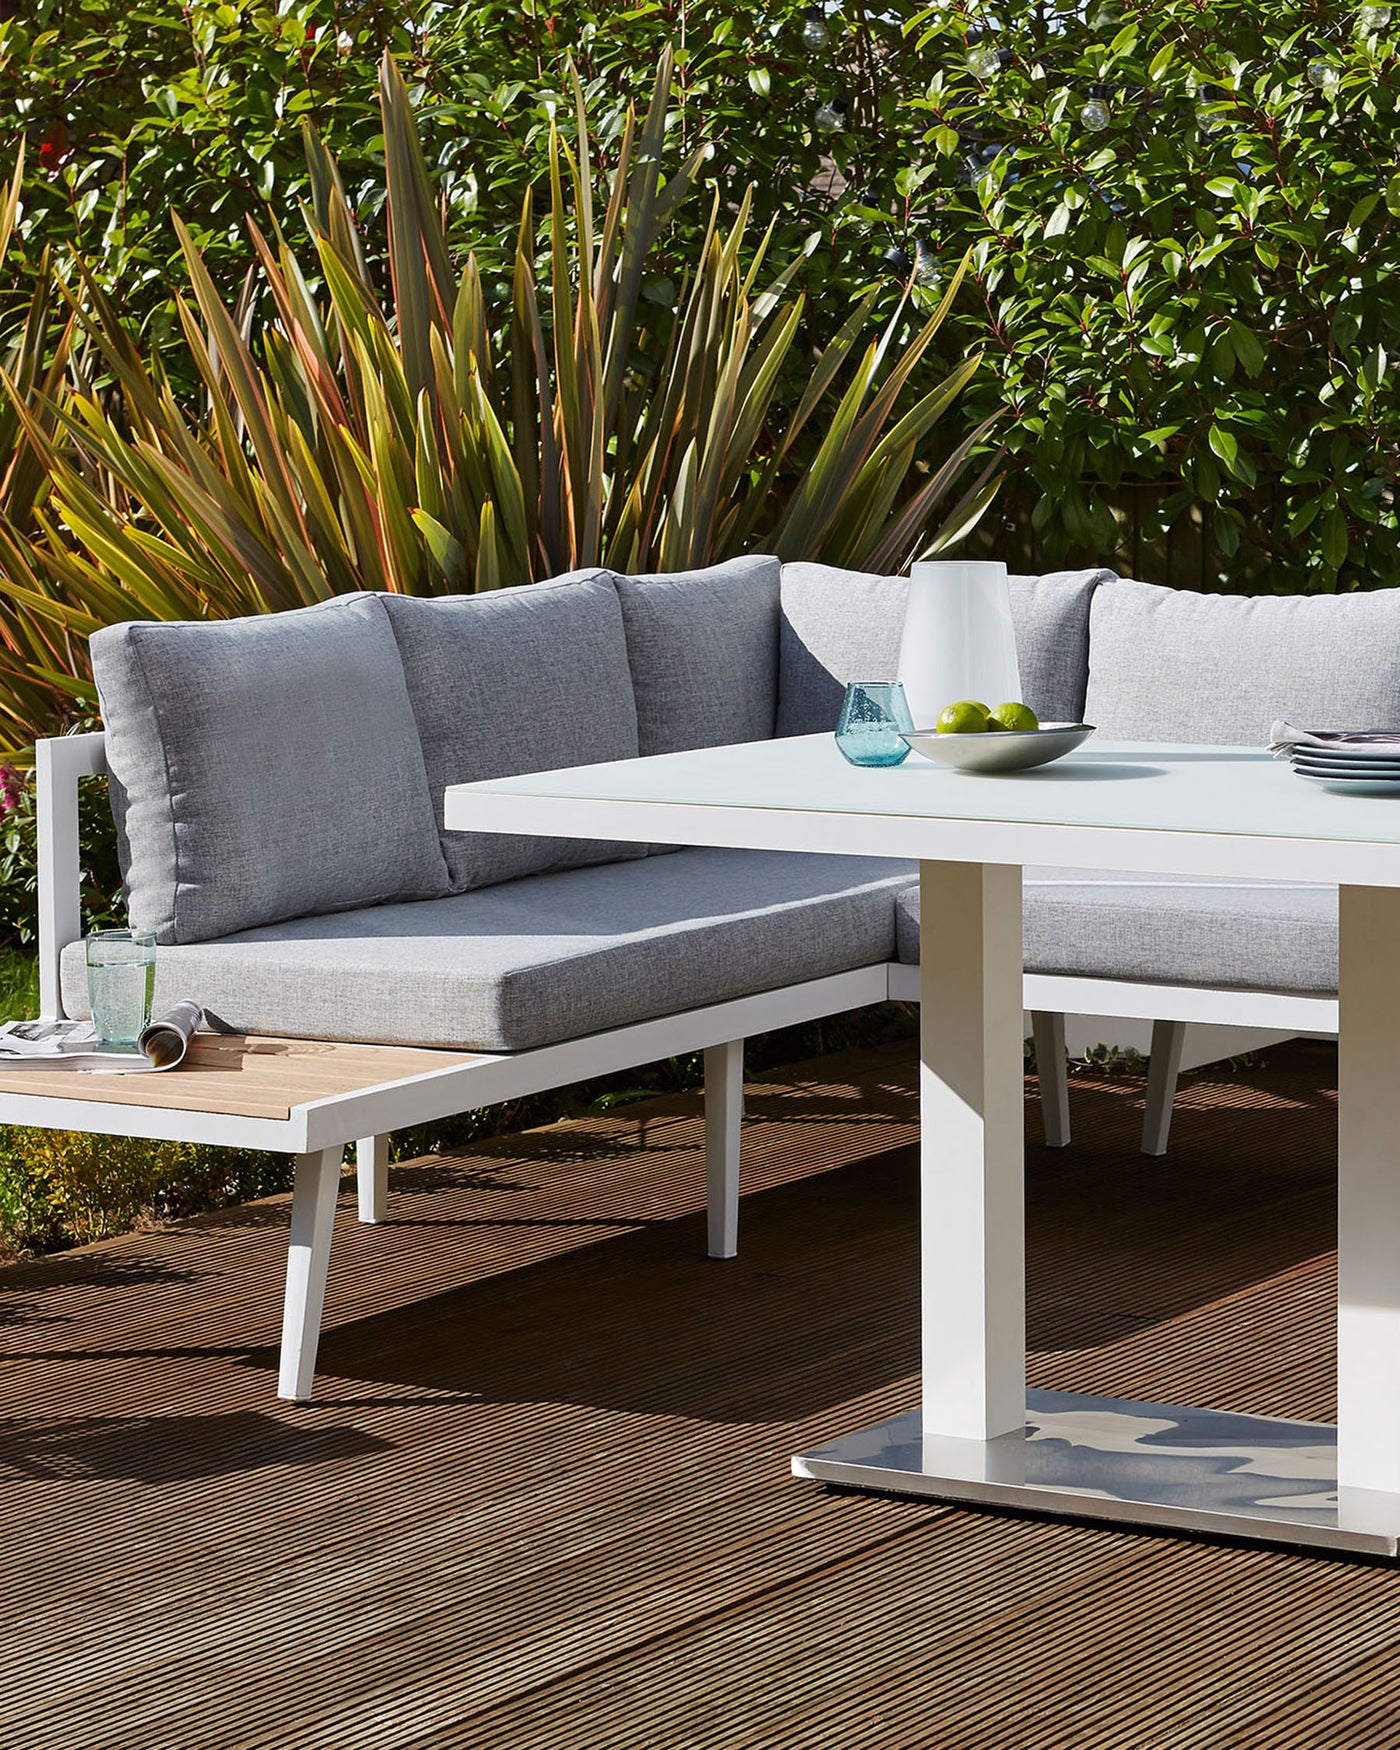 Contemporary outdoor furniture set featuring a corner sectional sofa with light grey cushions and a matching white rectangular coffee table, displayed on a wooden deck with lush greenery in the background.